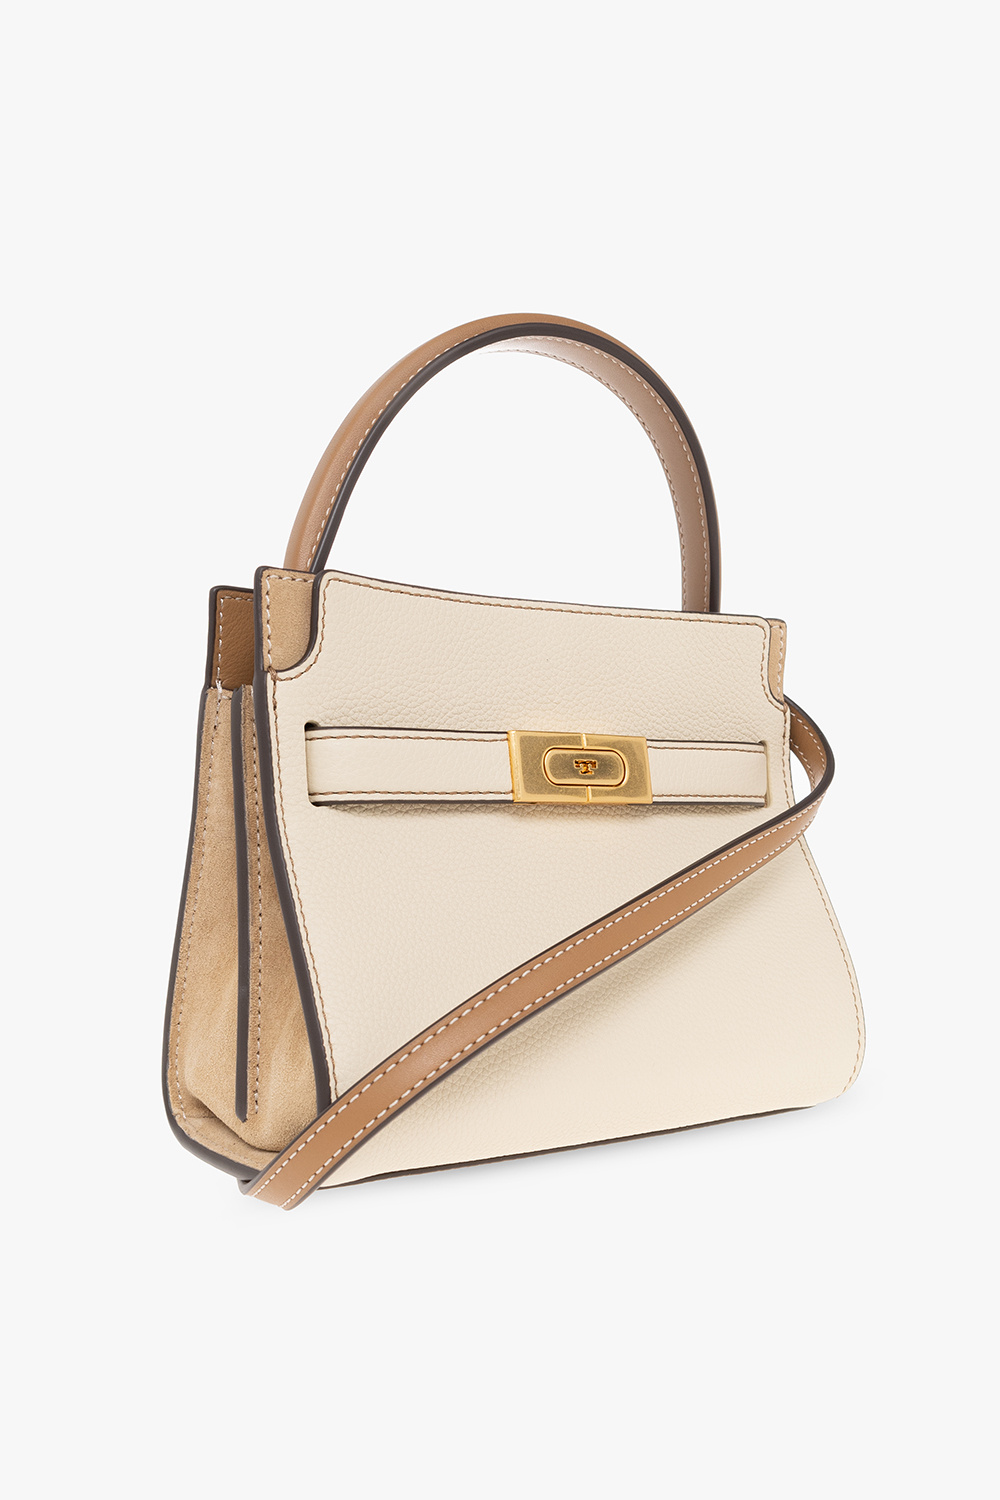 This sub introduced me to the Tory Burch Lee Radziwill bags - got